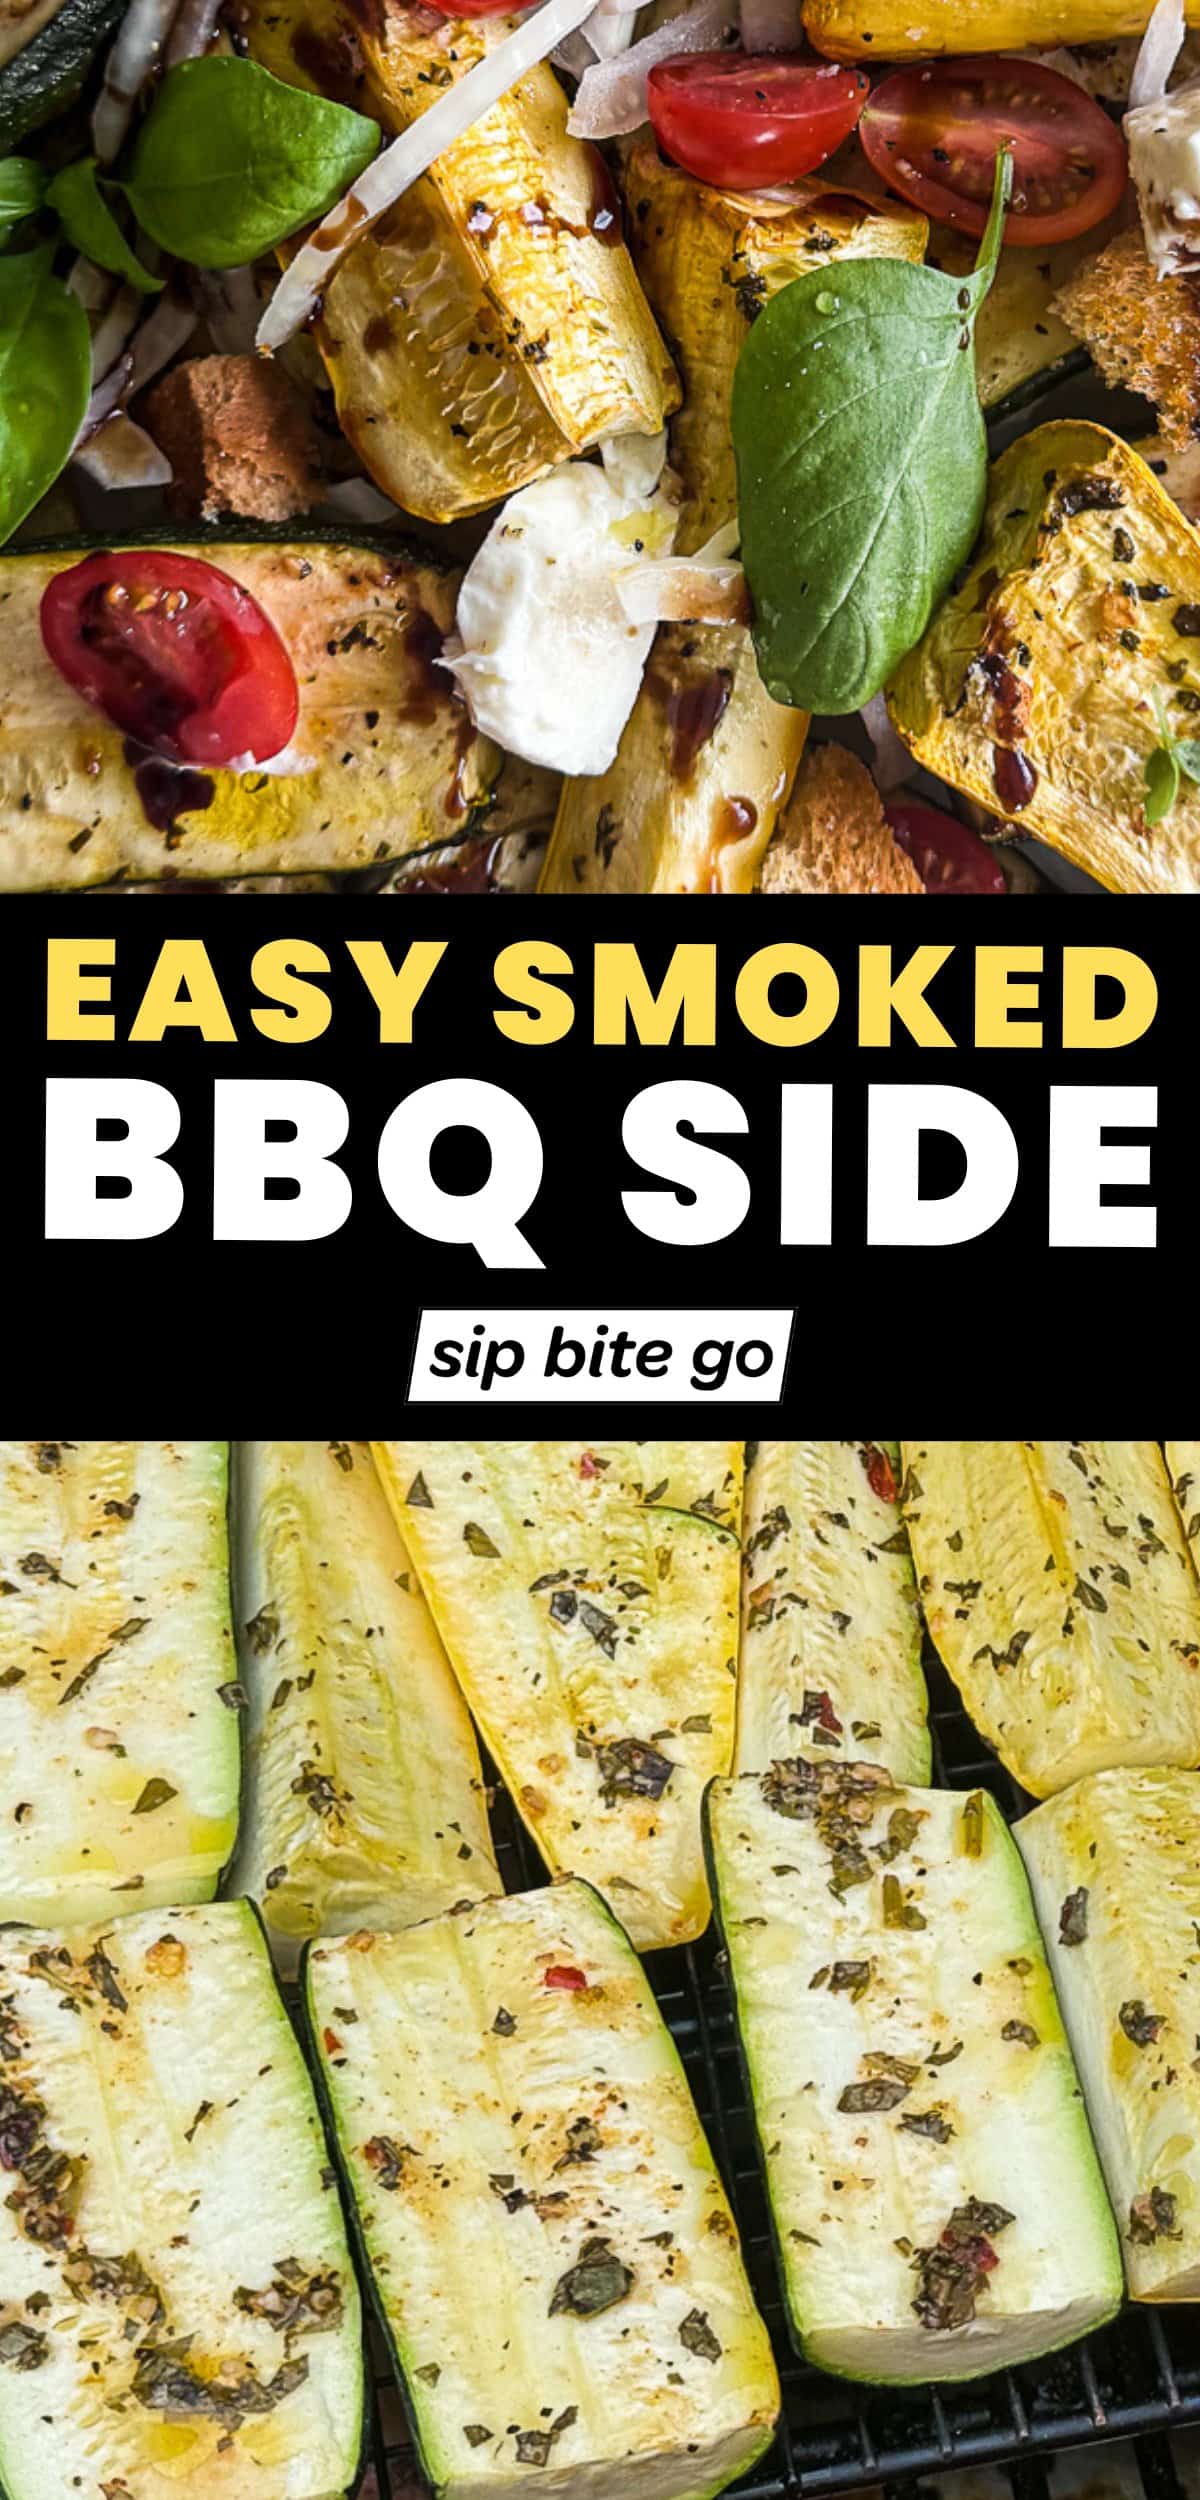 Traeger Smoker BBQ Side Dish Recipe with Before and After images of Smoked Zucchini and Summer Squash Salad